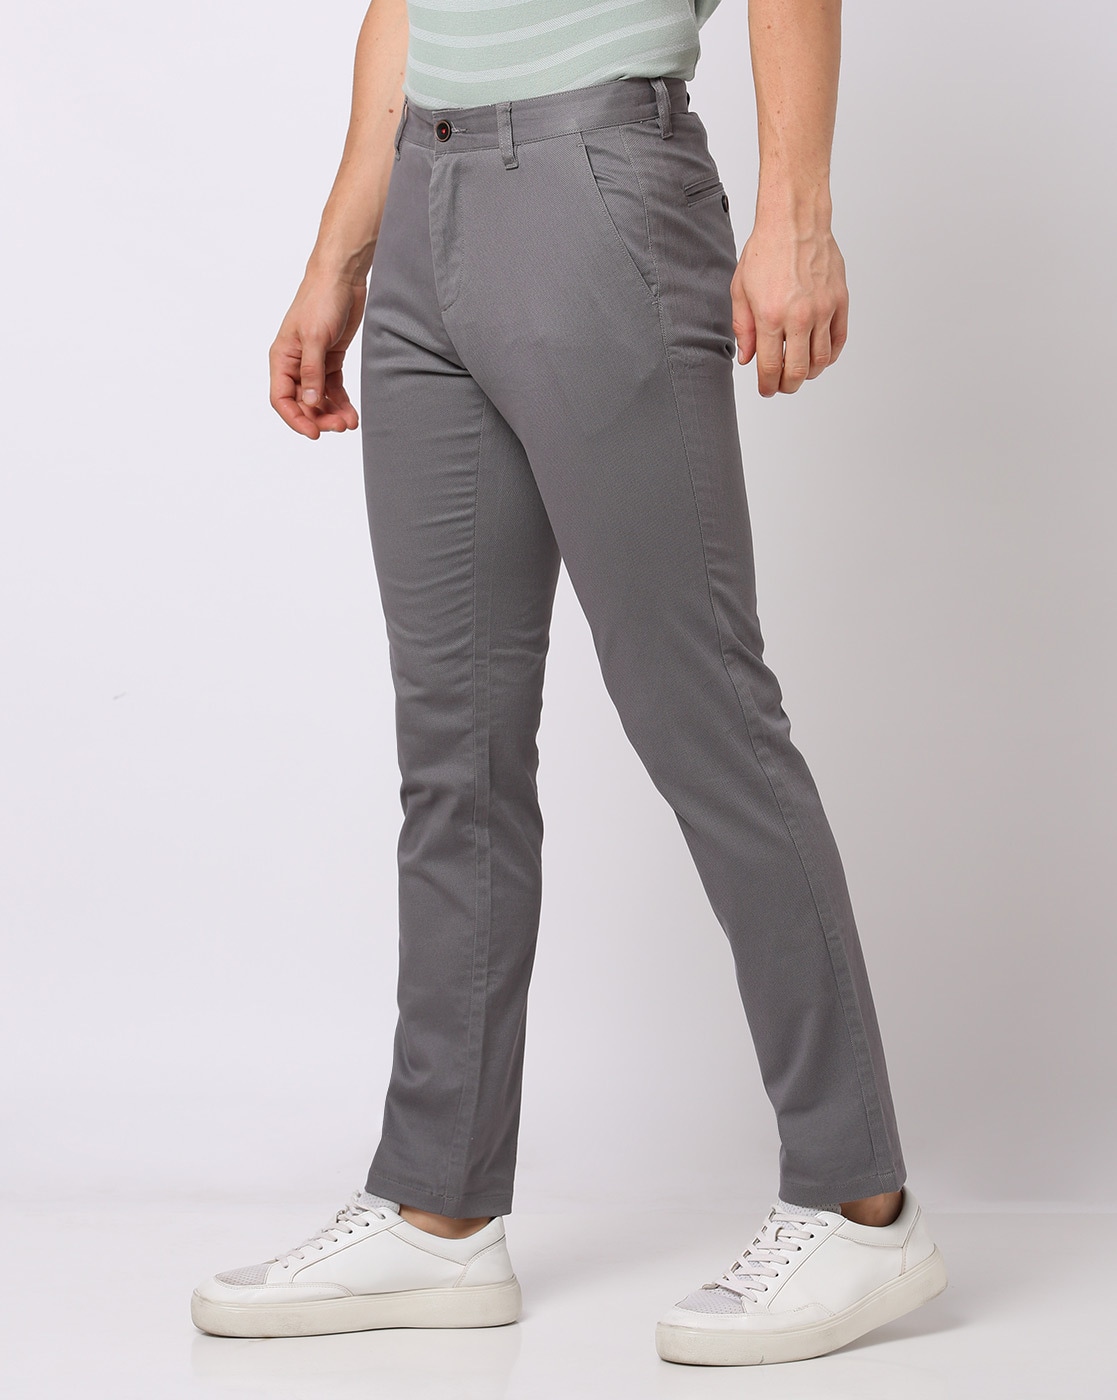 Branded Trousers In Kolkata, West Bengal At Best Price | Branded Trousers  Manufacturers, Suppliers In Calcutta